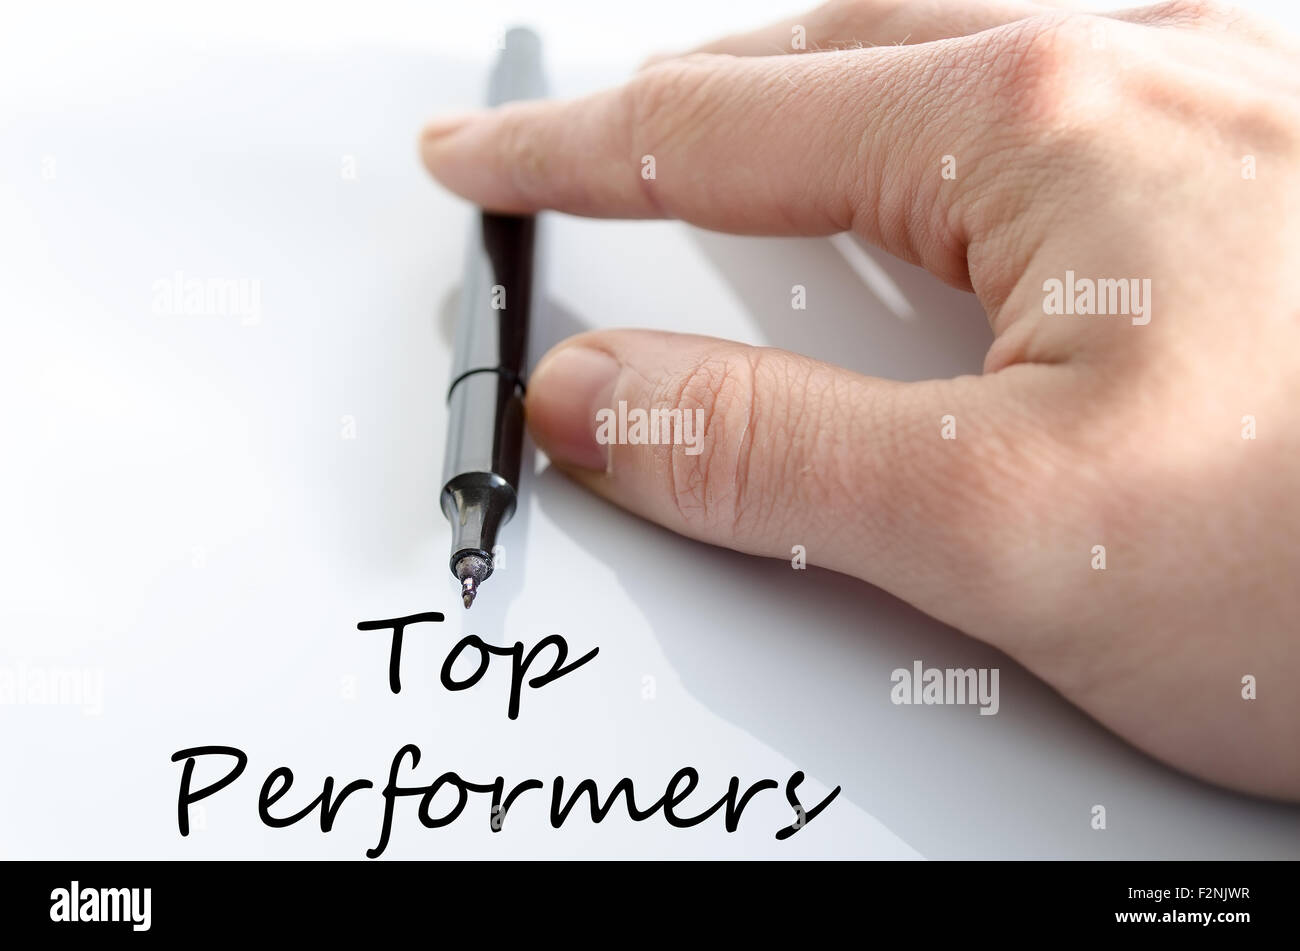 Top performers text concept isolated over white background Stock Photo